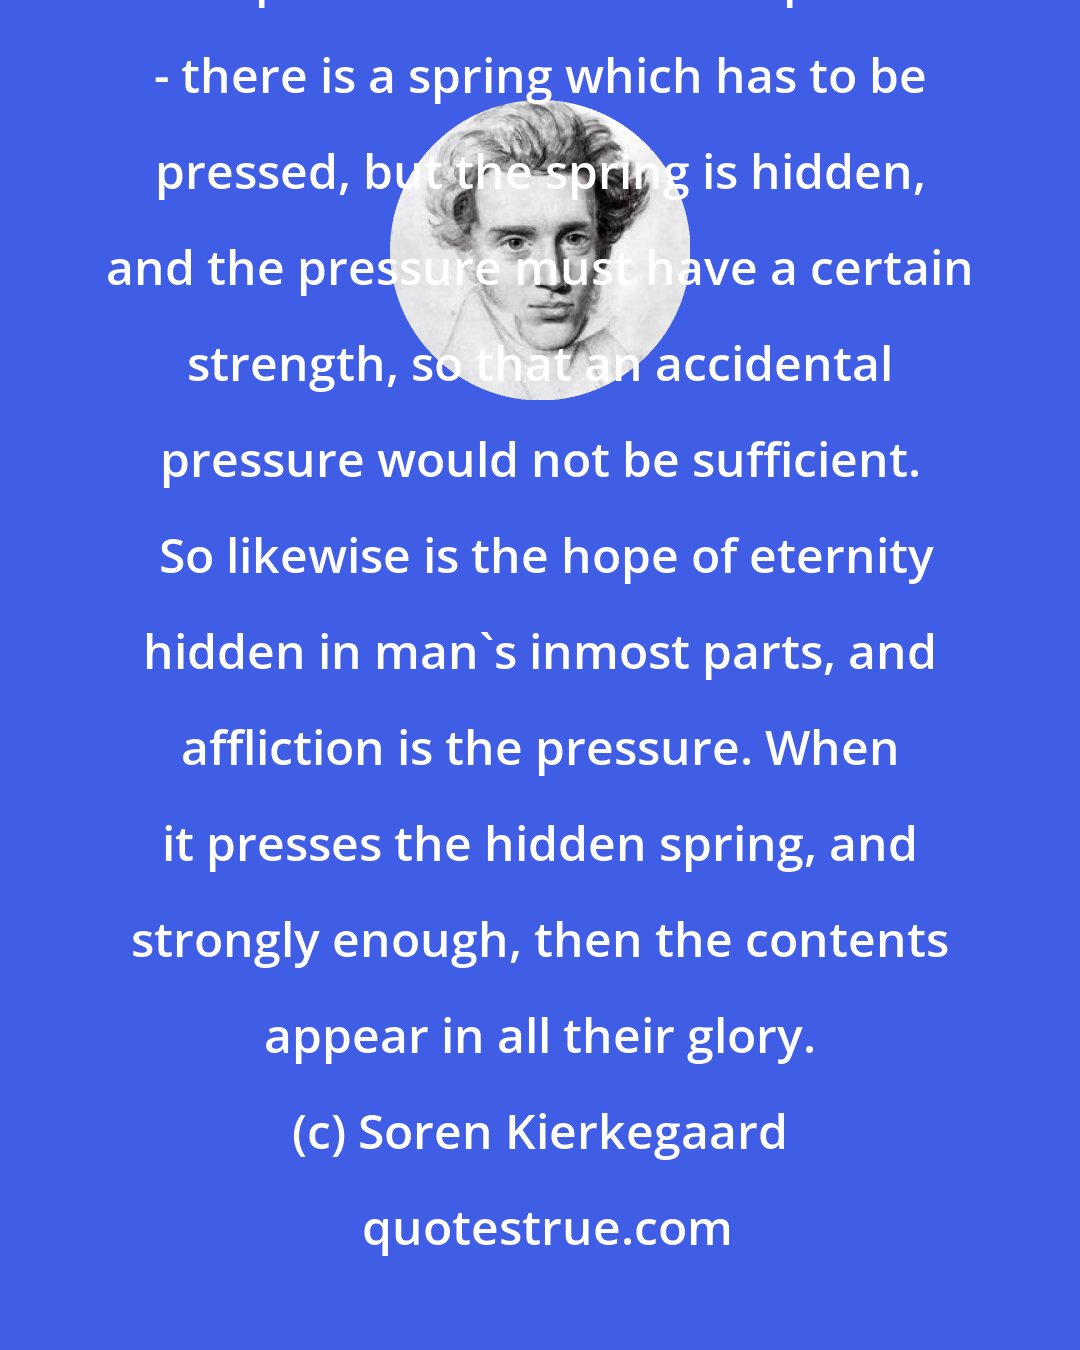 Soren Kierkegaard: Imagine hidden in a simpler exterior a secret receptacle wherein the most precious treasure is deposited - there is a spring which has to be pressed, but the spring is hidden, and the pressure must have a certain strength, so that an accidental pressure would not be sufficient.  So likewise is the hope of eternity hidden in man's inmost parts, and affliction is the pressure. When it presses the hidden spring, and strongly enough, then the contents appear in all their glory.